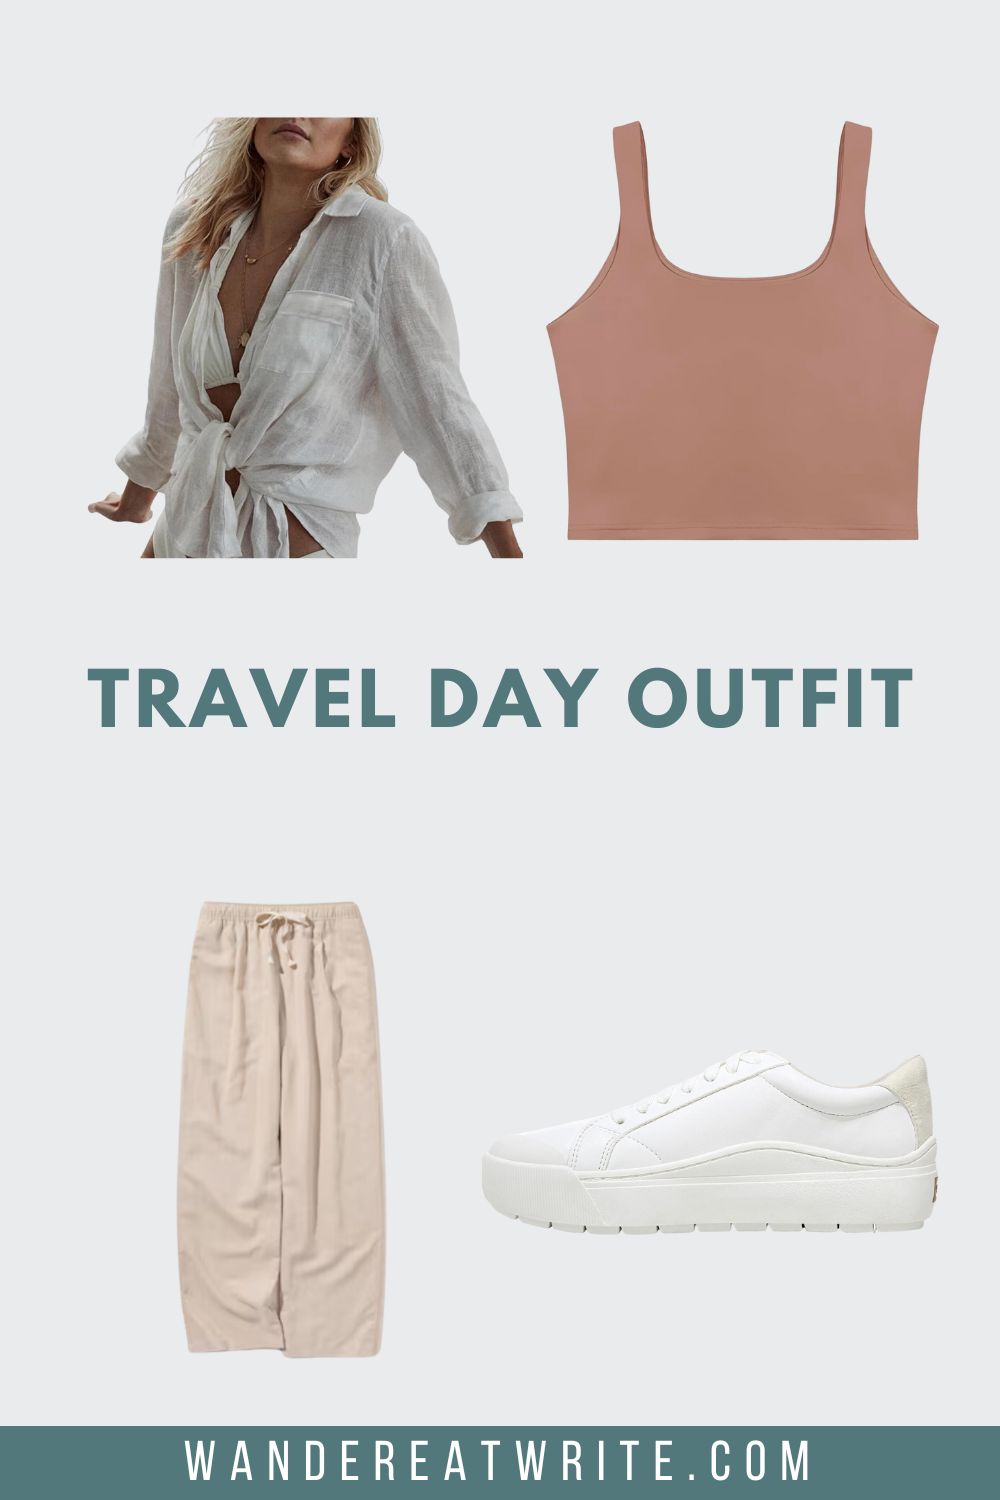 Cruise travel day outfit ideas for women. Photos clockwise from top left: a woman wearing a white linen button down shirt, a pink cropped sleeveless top, white sneakers, beige linen pants